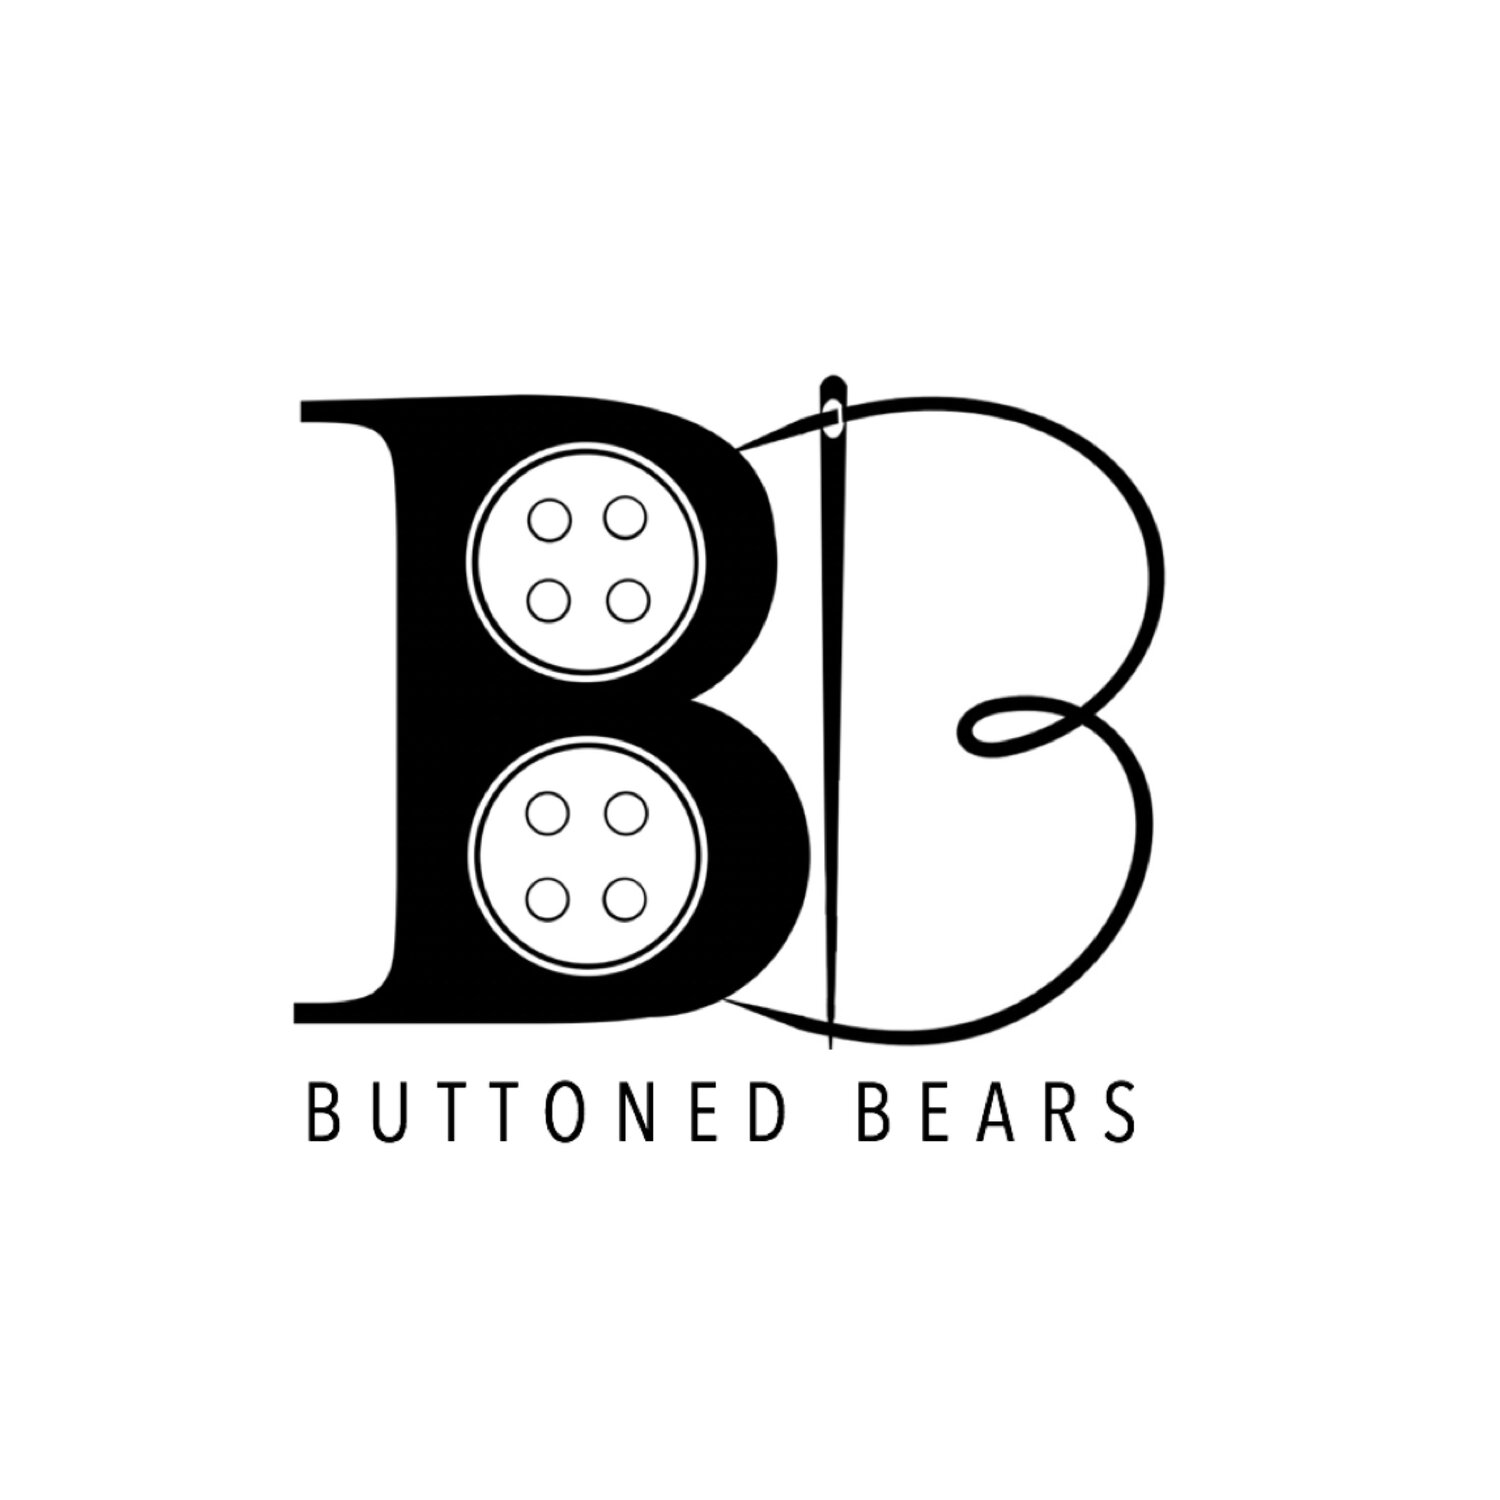 BUTTONED BEARS